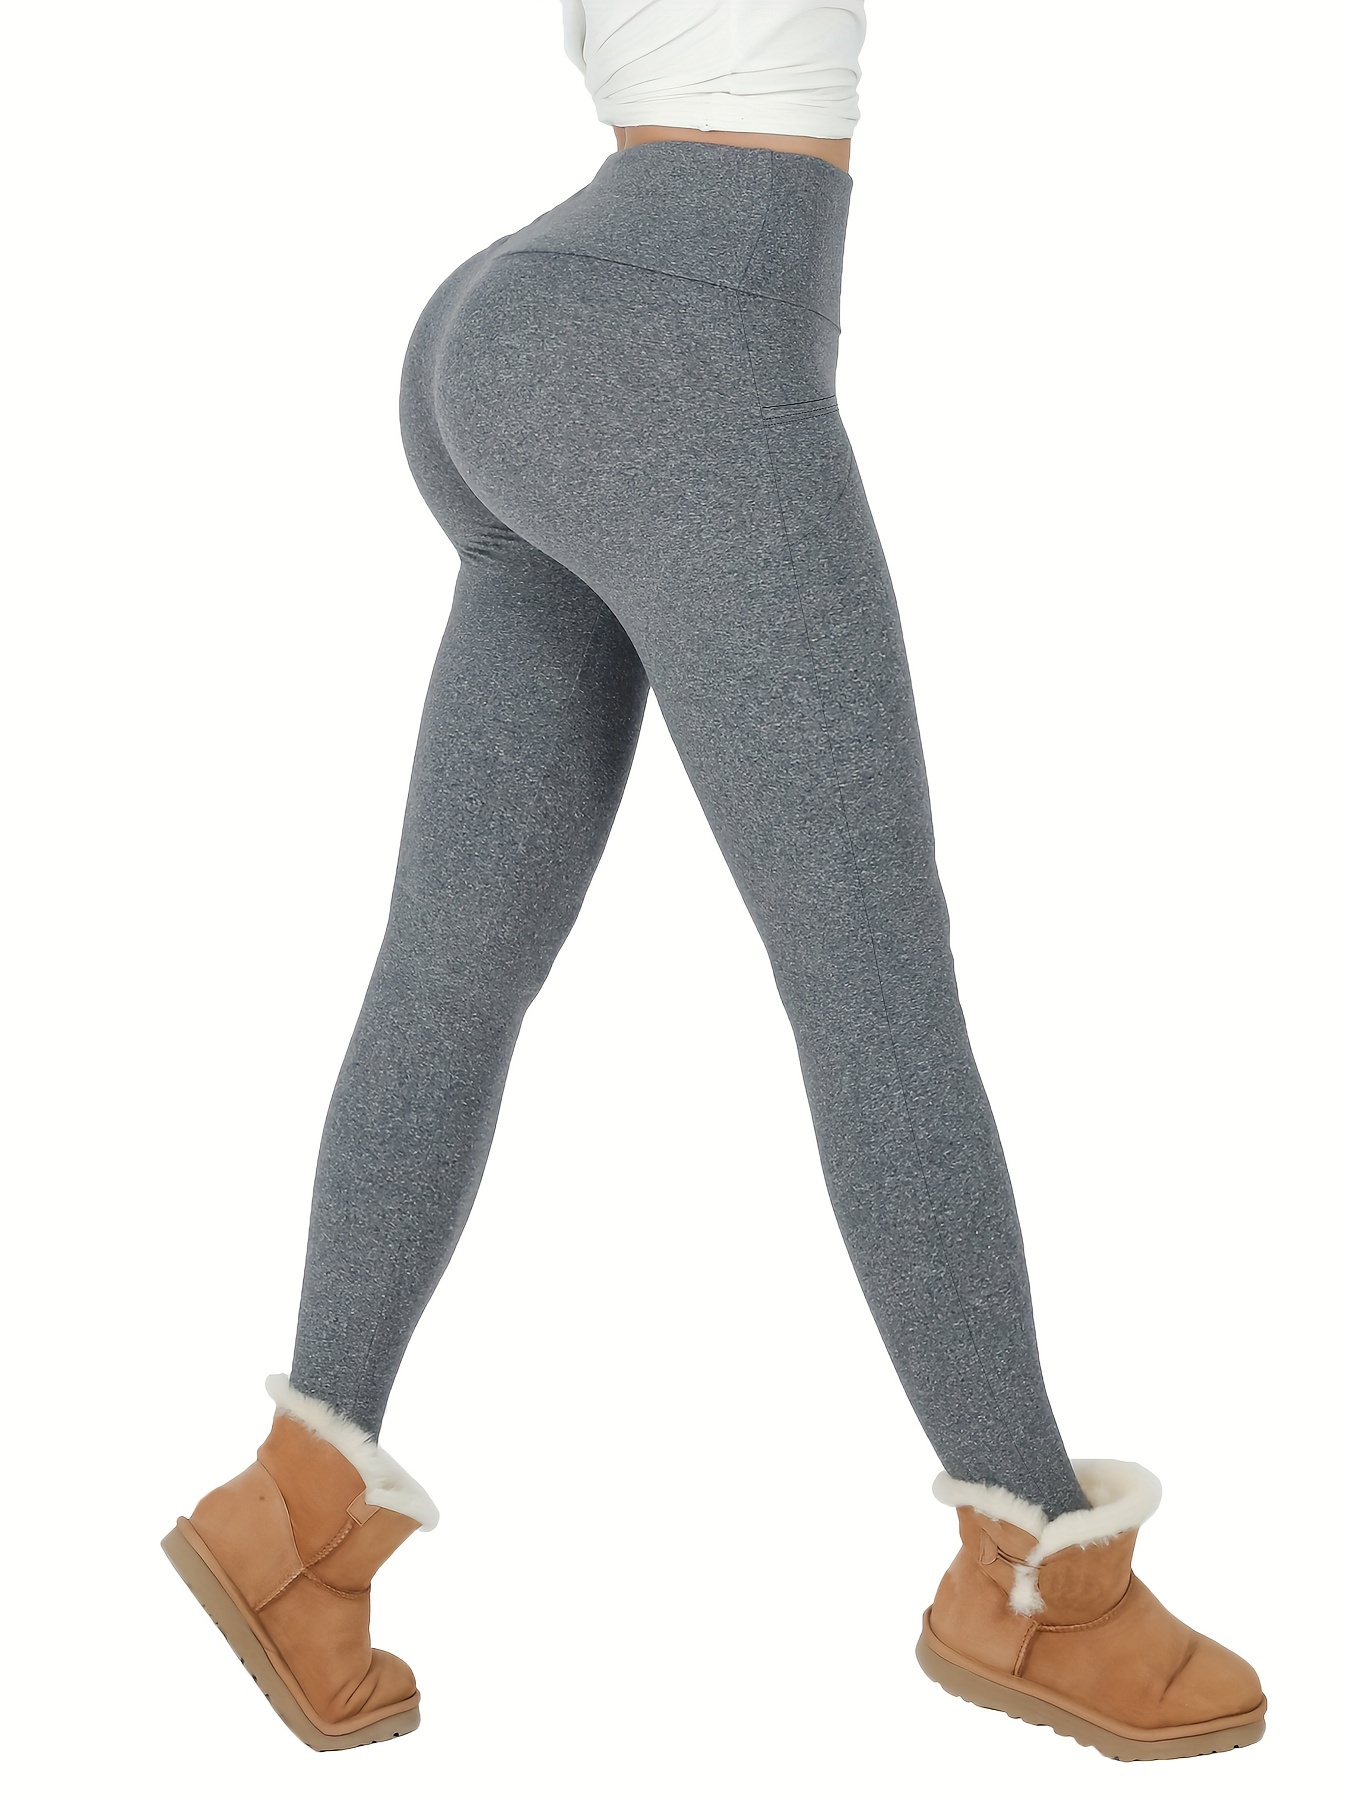 CUGOAO Fleece Lined Leggings with Pockets High Waisted Thermal Warm Workout  Leggings Tights Winter Warm Yoga Pants for Women